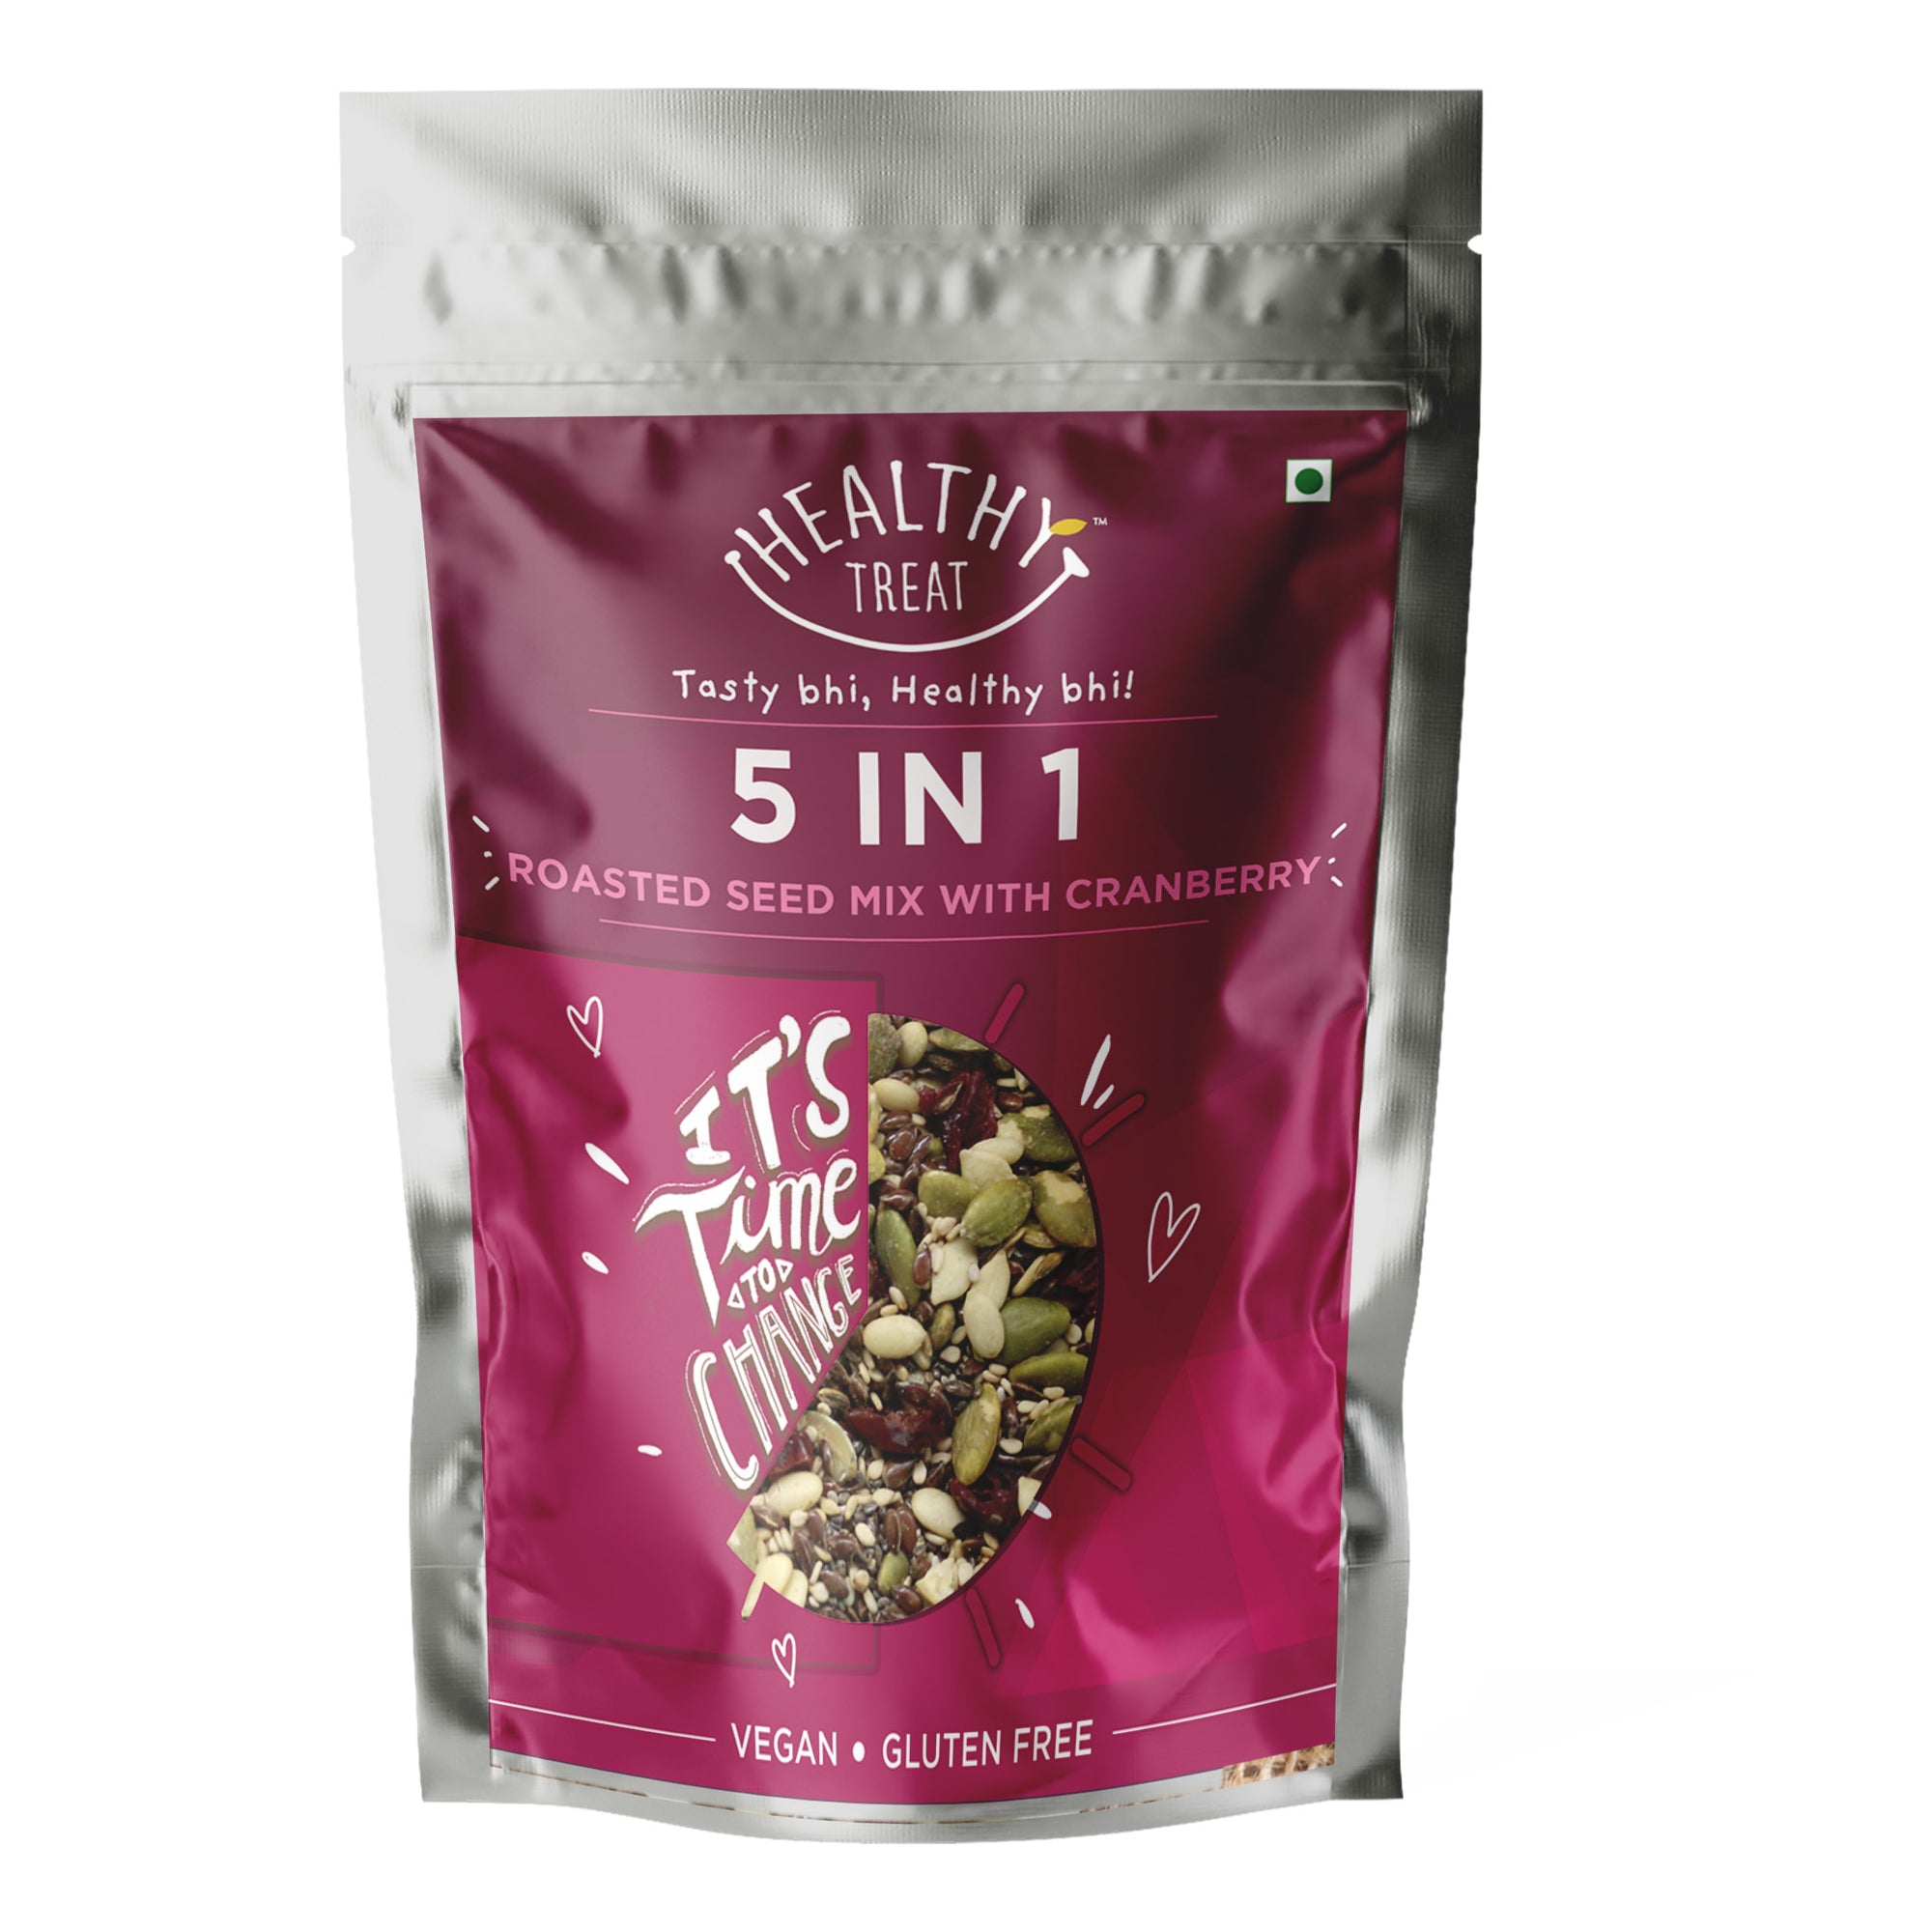 Healthy Treat Roasted 5 in 1 Superseed mix or mixed seeds classic with cranberries is protein rich and rich in antioxidants. It's a blend of roasted watermelon seeds, flax seeds, sesame seeds, chia seeds and pumpkin seeds and dried cranberries mix